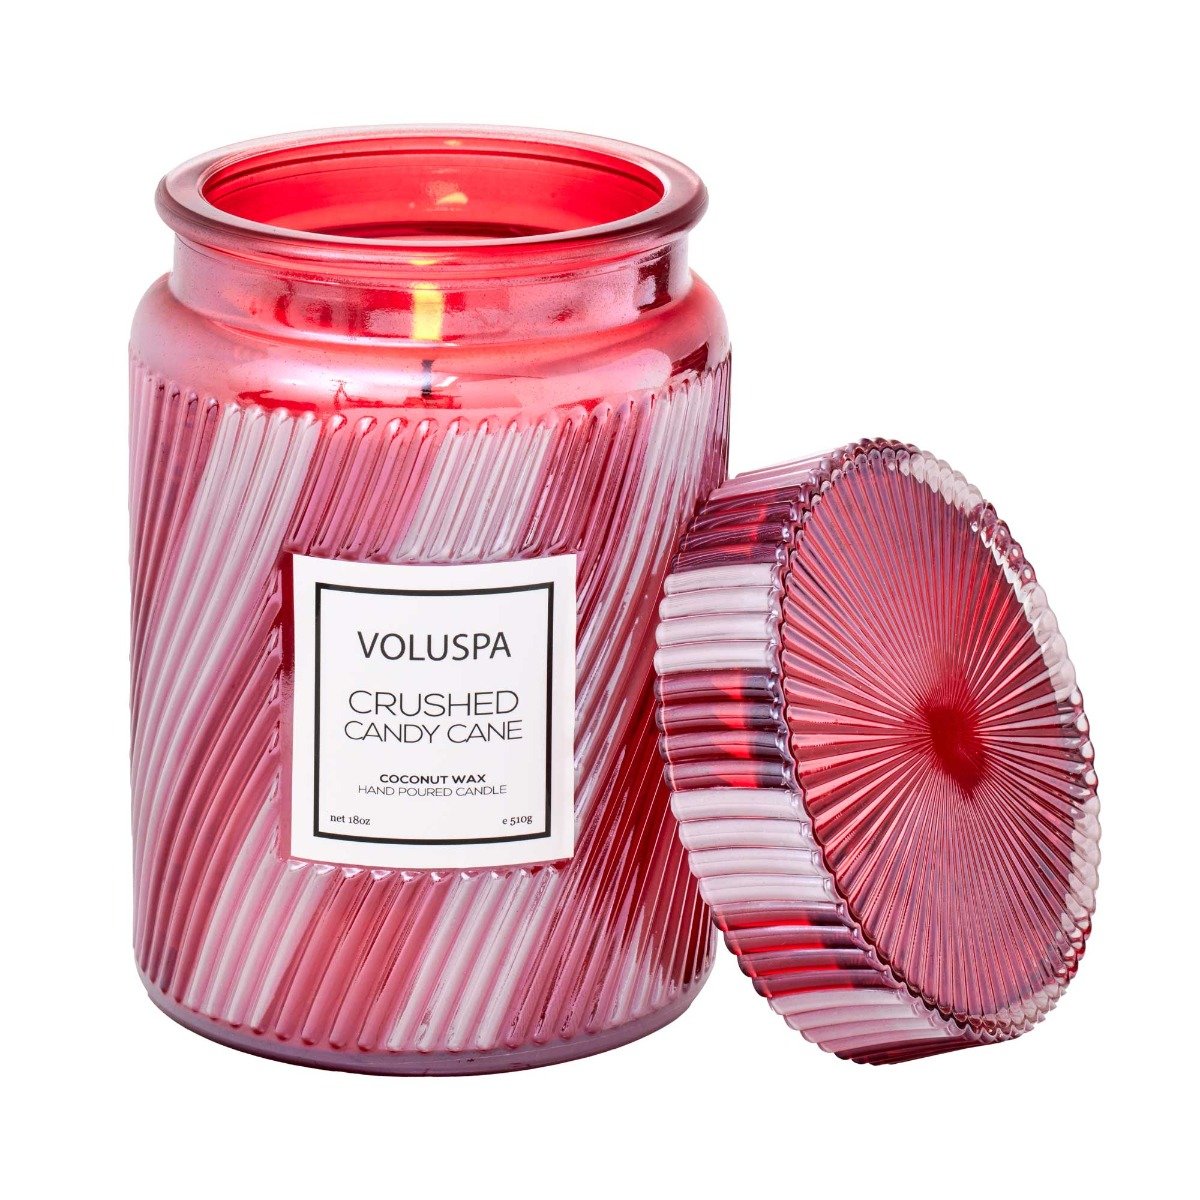 Crushed Candy Cane Candle